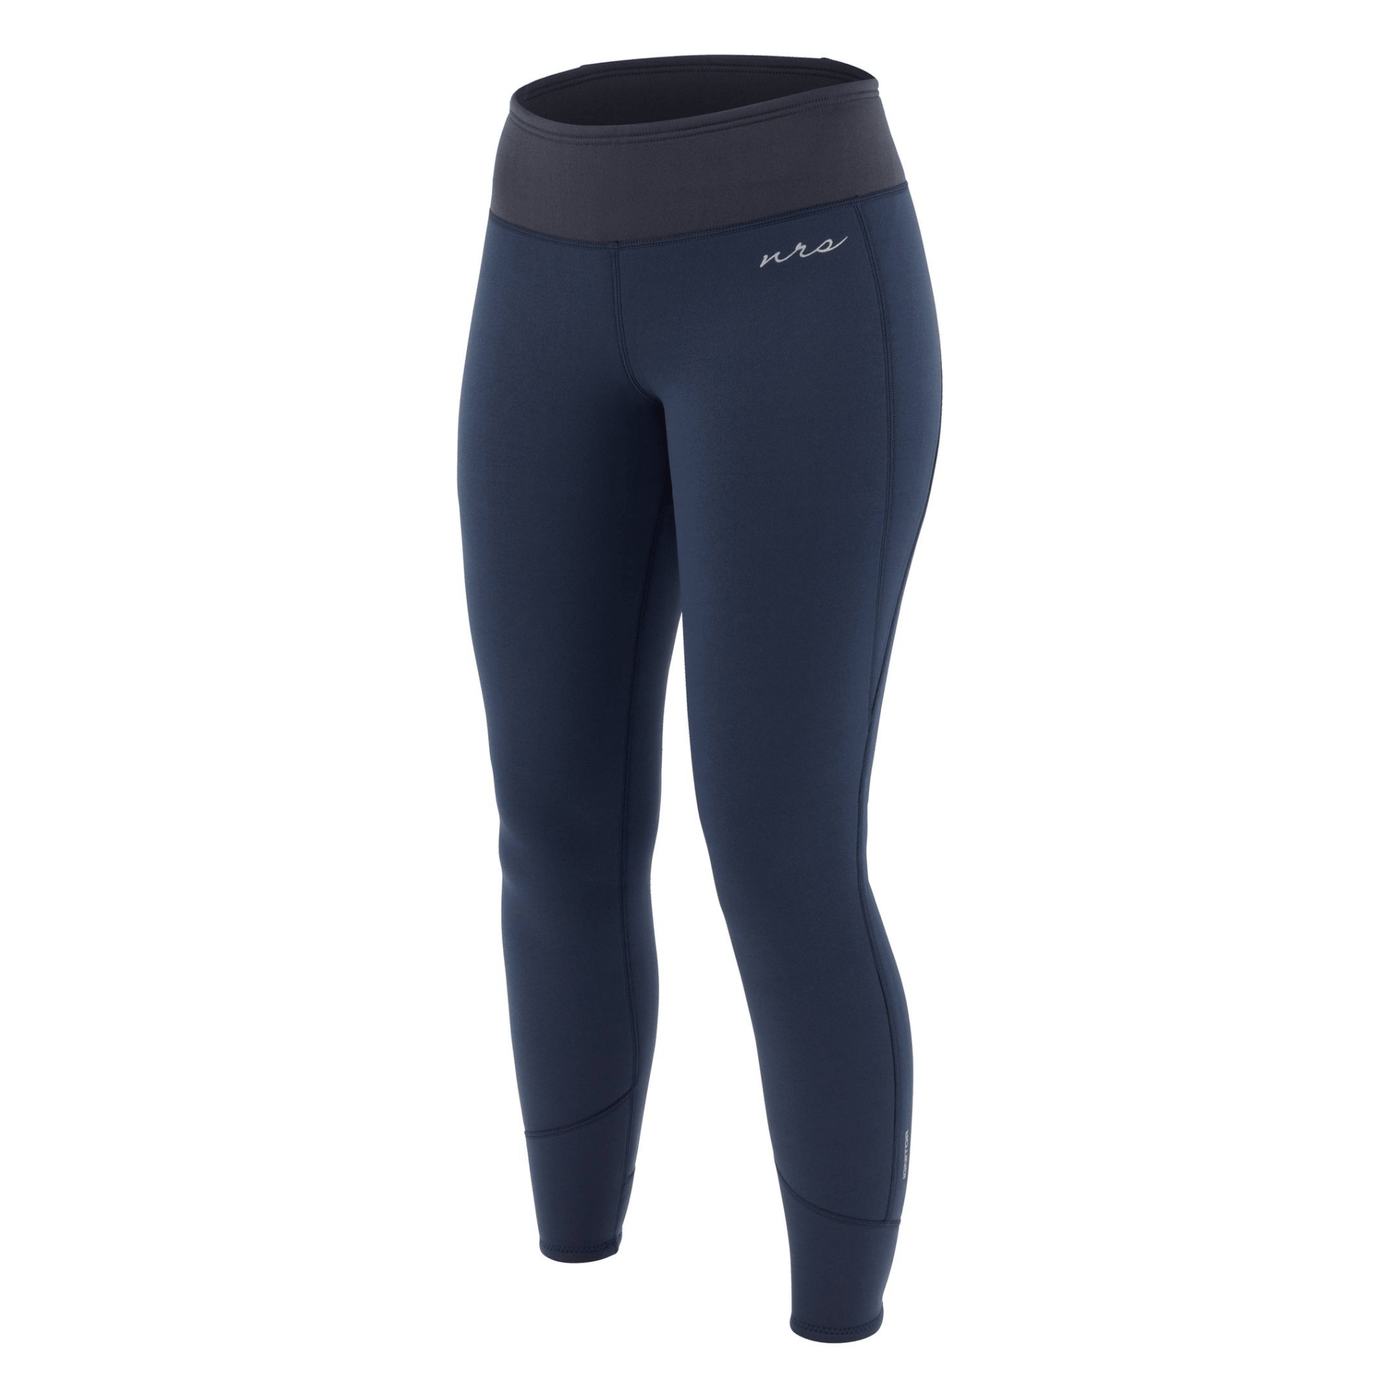 NRS Ignitor Pant - Womens | Kayaking Clothing Gear | Further Faster Christchurch NZ